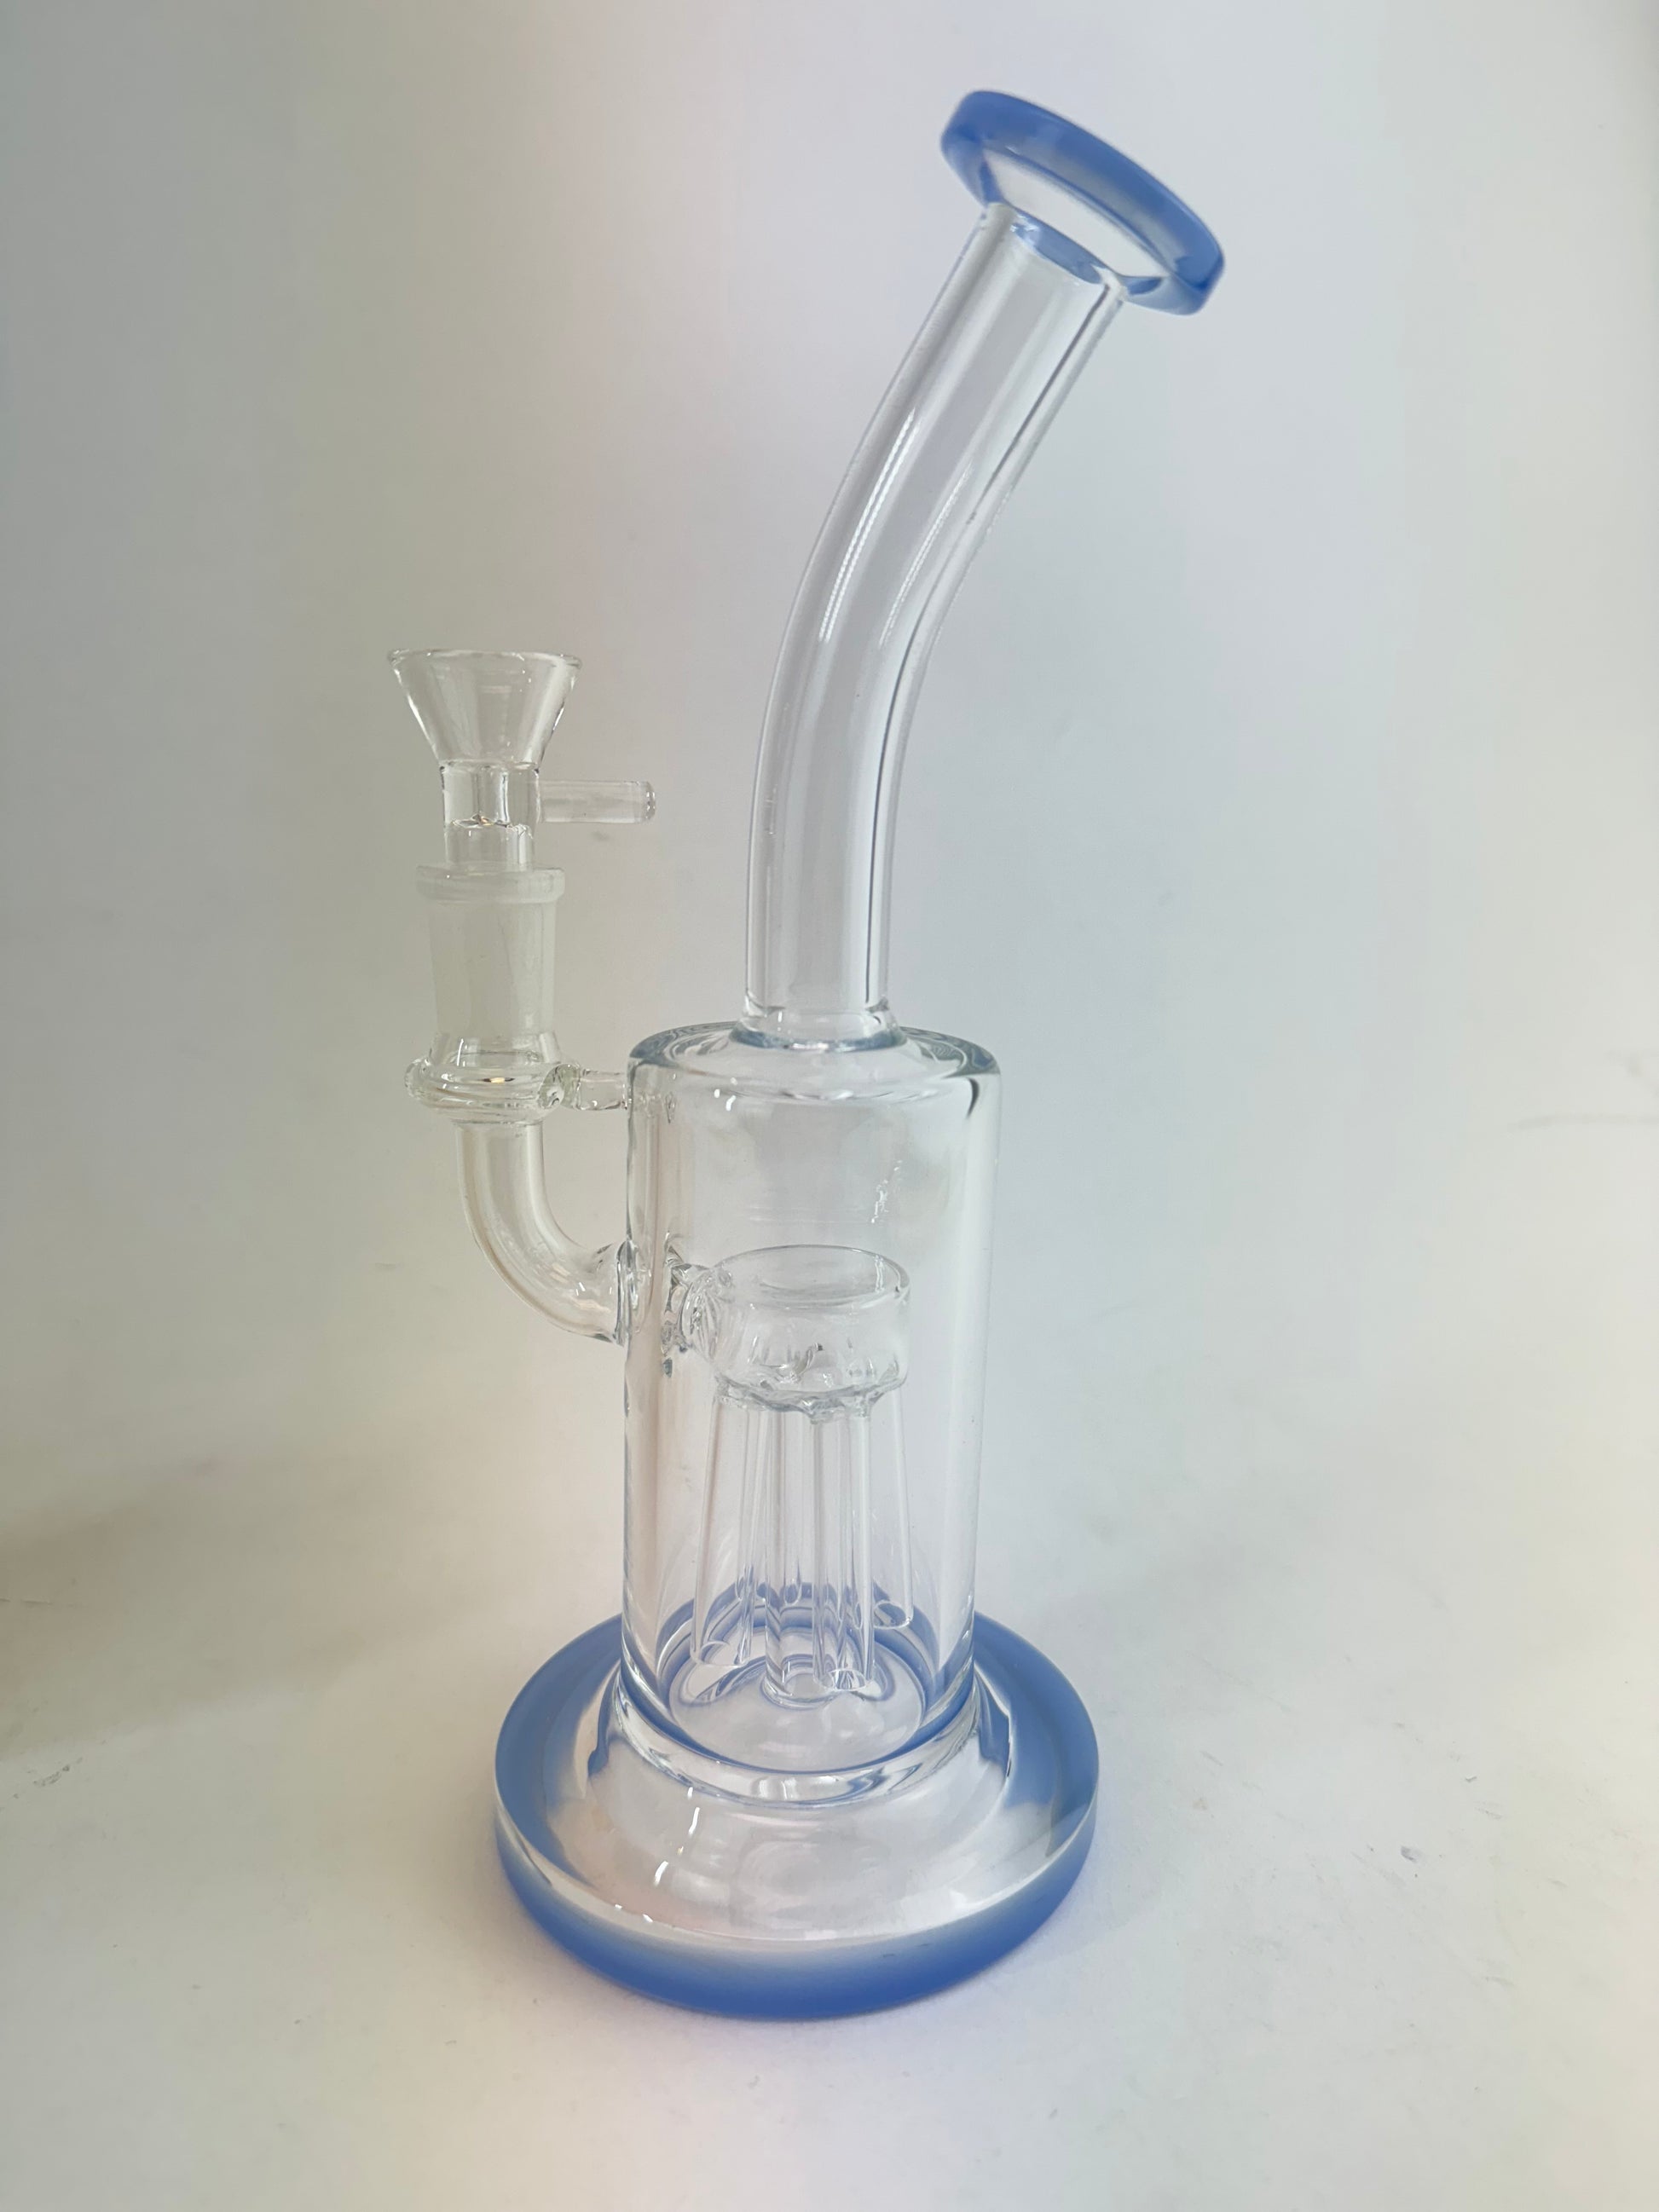 9 Inch New Showerhead Water Pipe